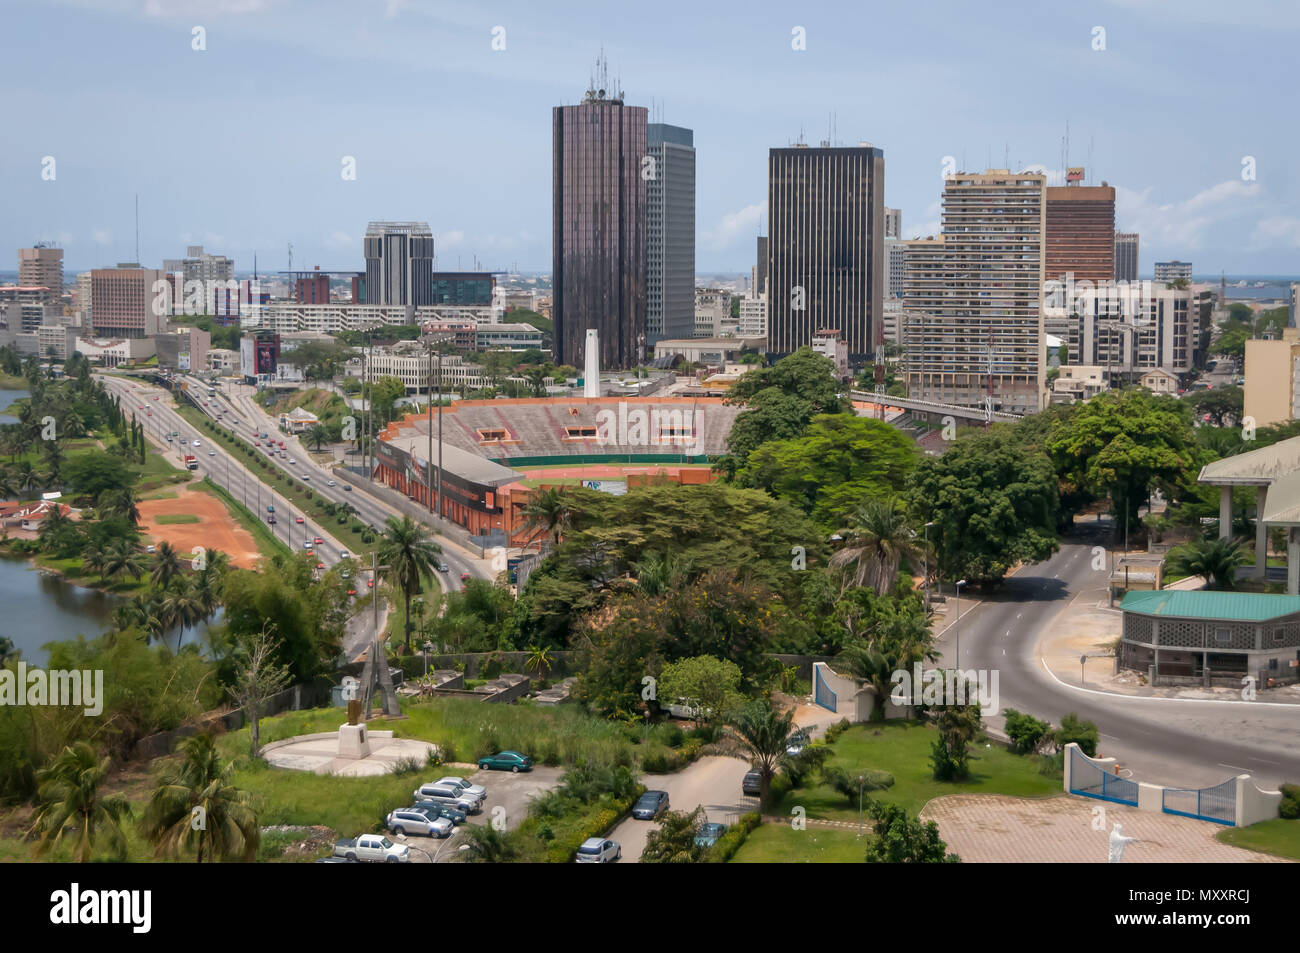 ABIDJAN, IVORY COAST, AFRICA. April 2013. The view of Abidjan, the largest city in the Ivory Coast. Plateau, the downtown. Stock Photo